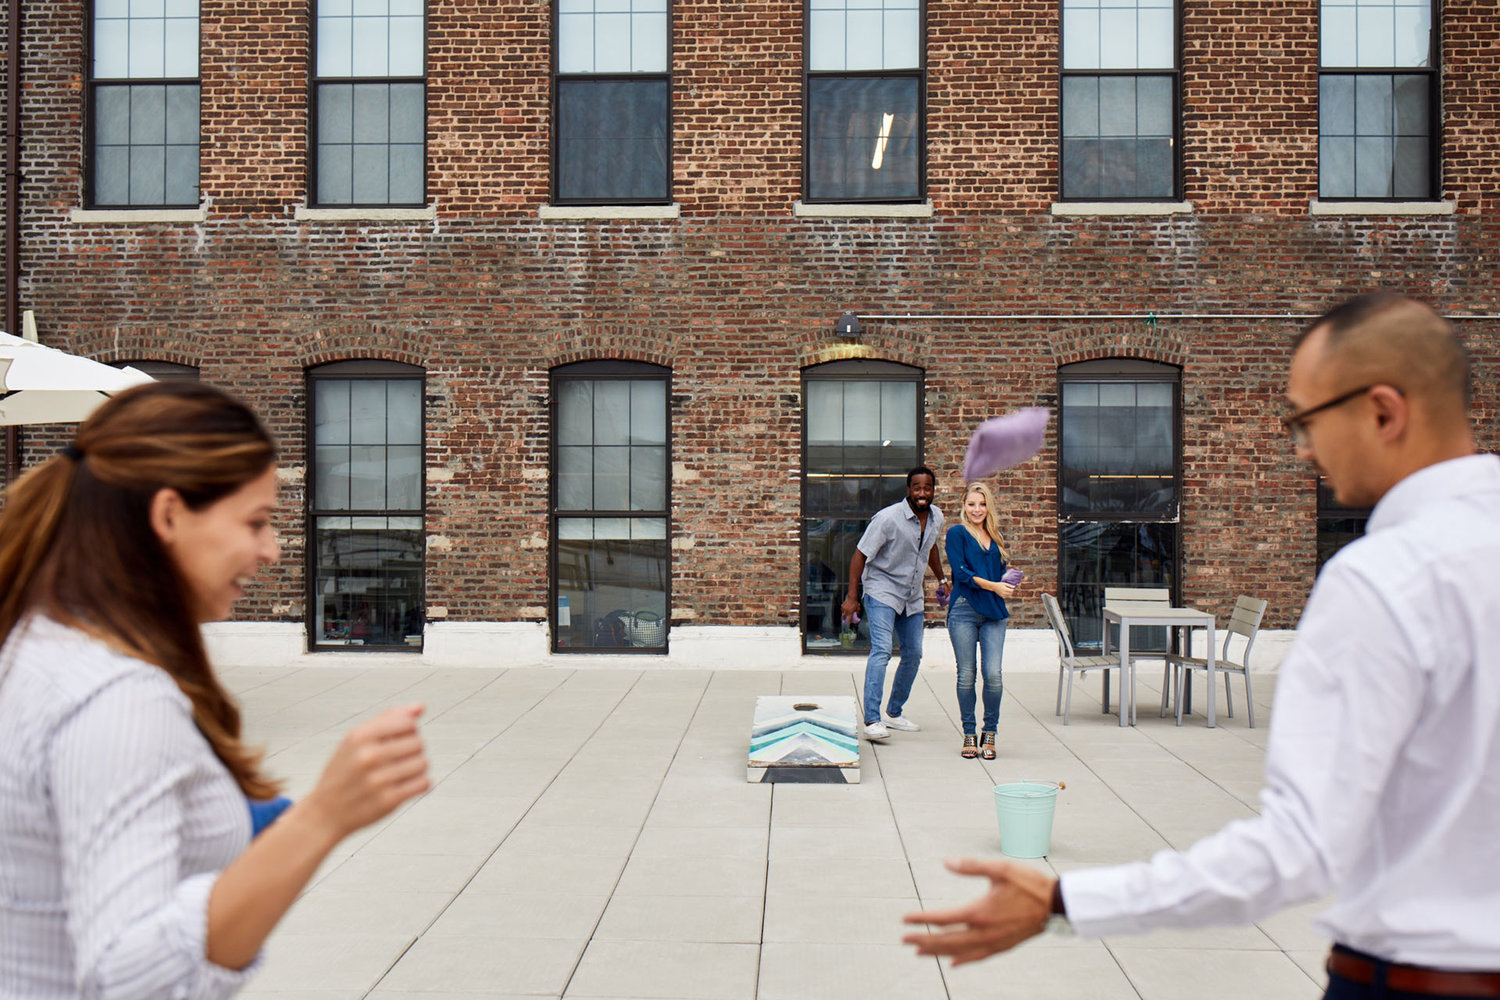 Rooftop socialization area for employees